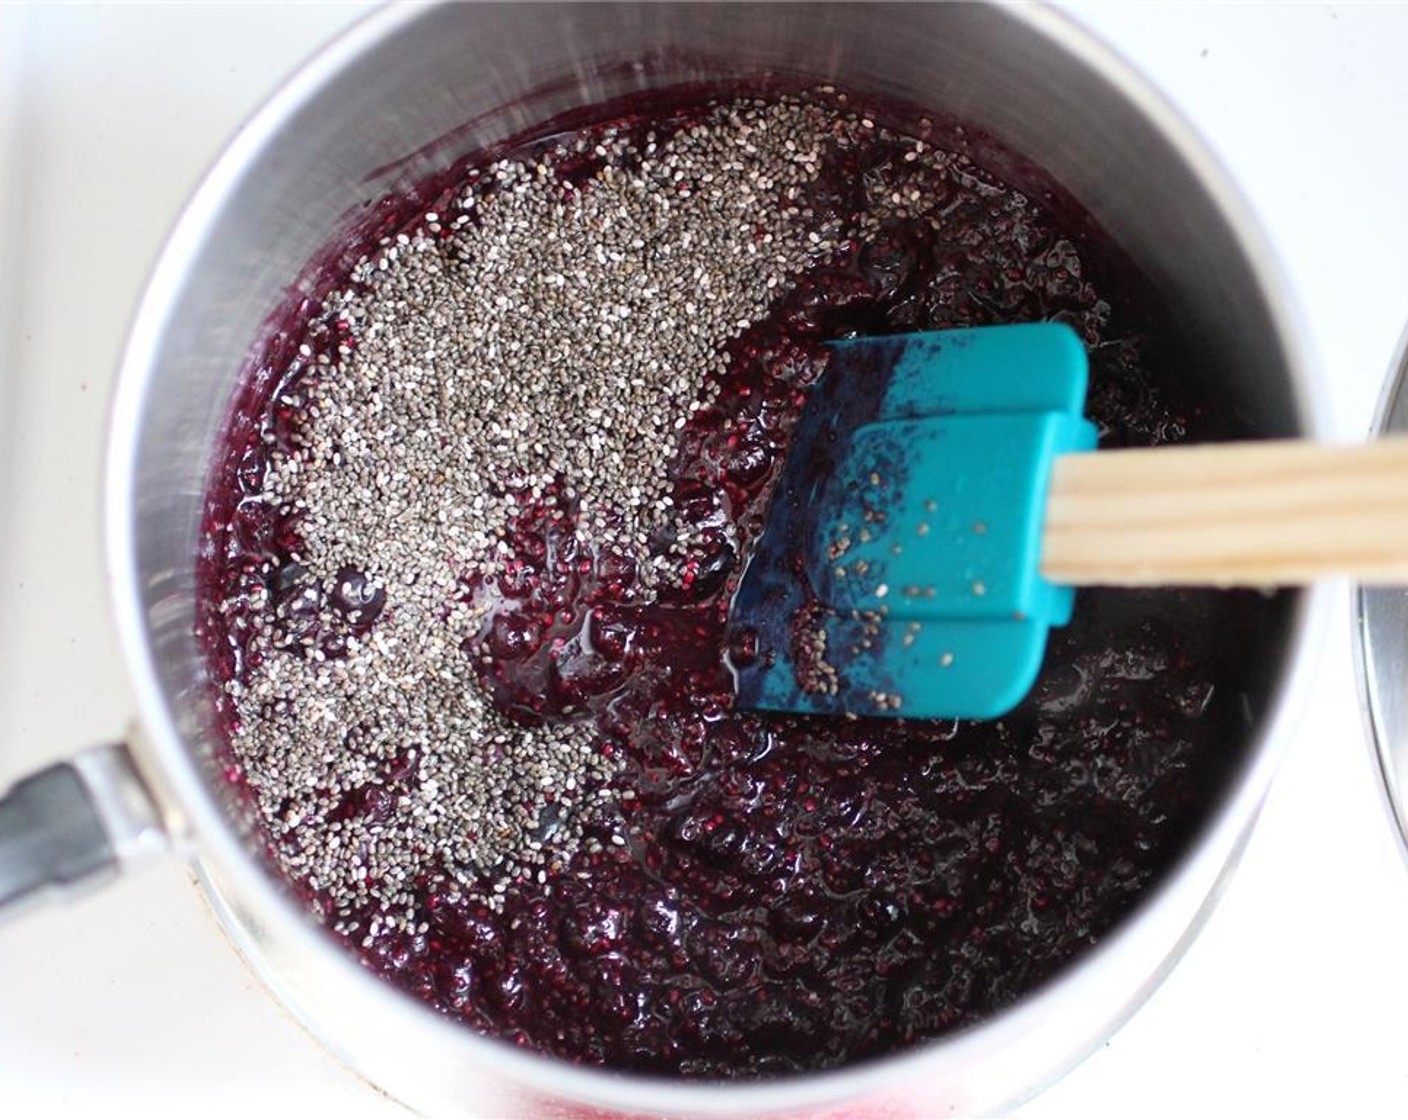 step 4 Stir in Agave Syrup (1/2 Tbsp). Add Chia Seeds (2 1/2 Tbsp), stir, then remove from heat. The chia seeds give the jam a bit of a seed feel, so if you don’t like that (think raspberry jam consistency), you could also blend the jam to make it a bit more jelly-like.